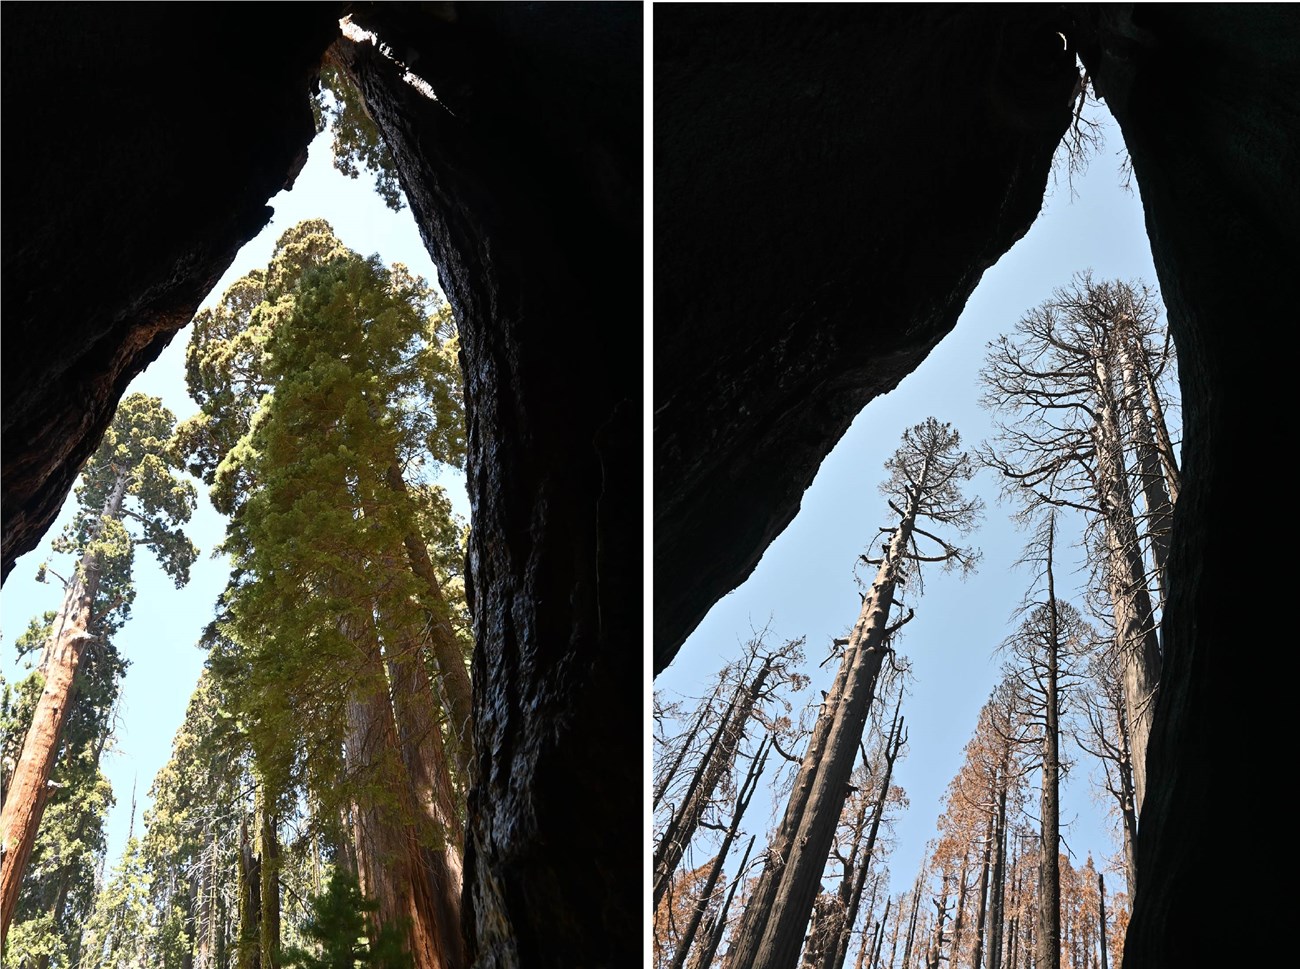 Left image: View from inside giant sequoia fire scar up toward the tops of live giant sequoias; right: same view after a wildfire killed al of the sequoias in this view, their green branches now brown with dead needles.